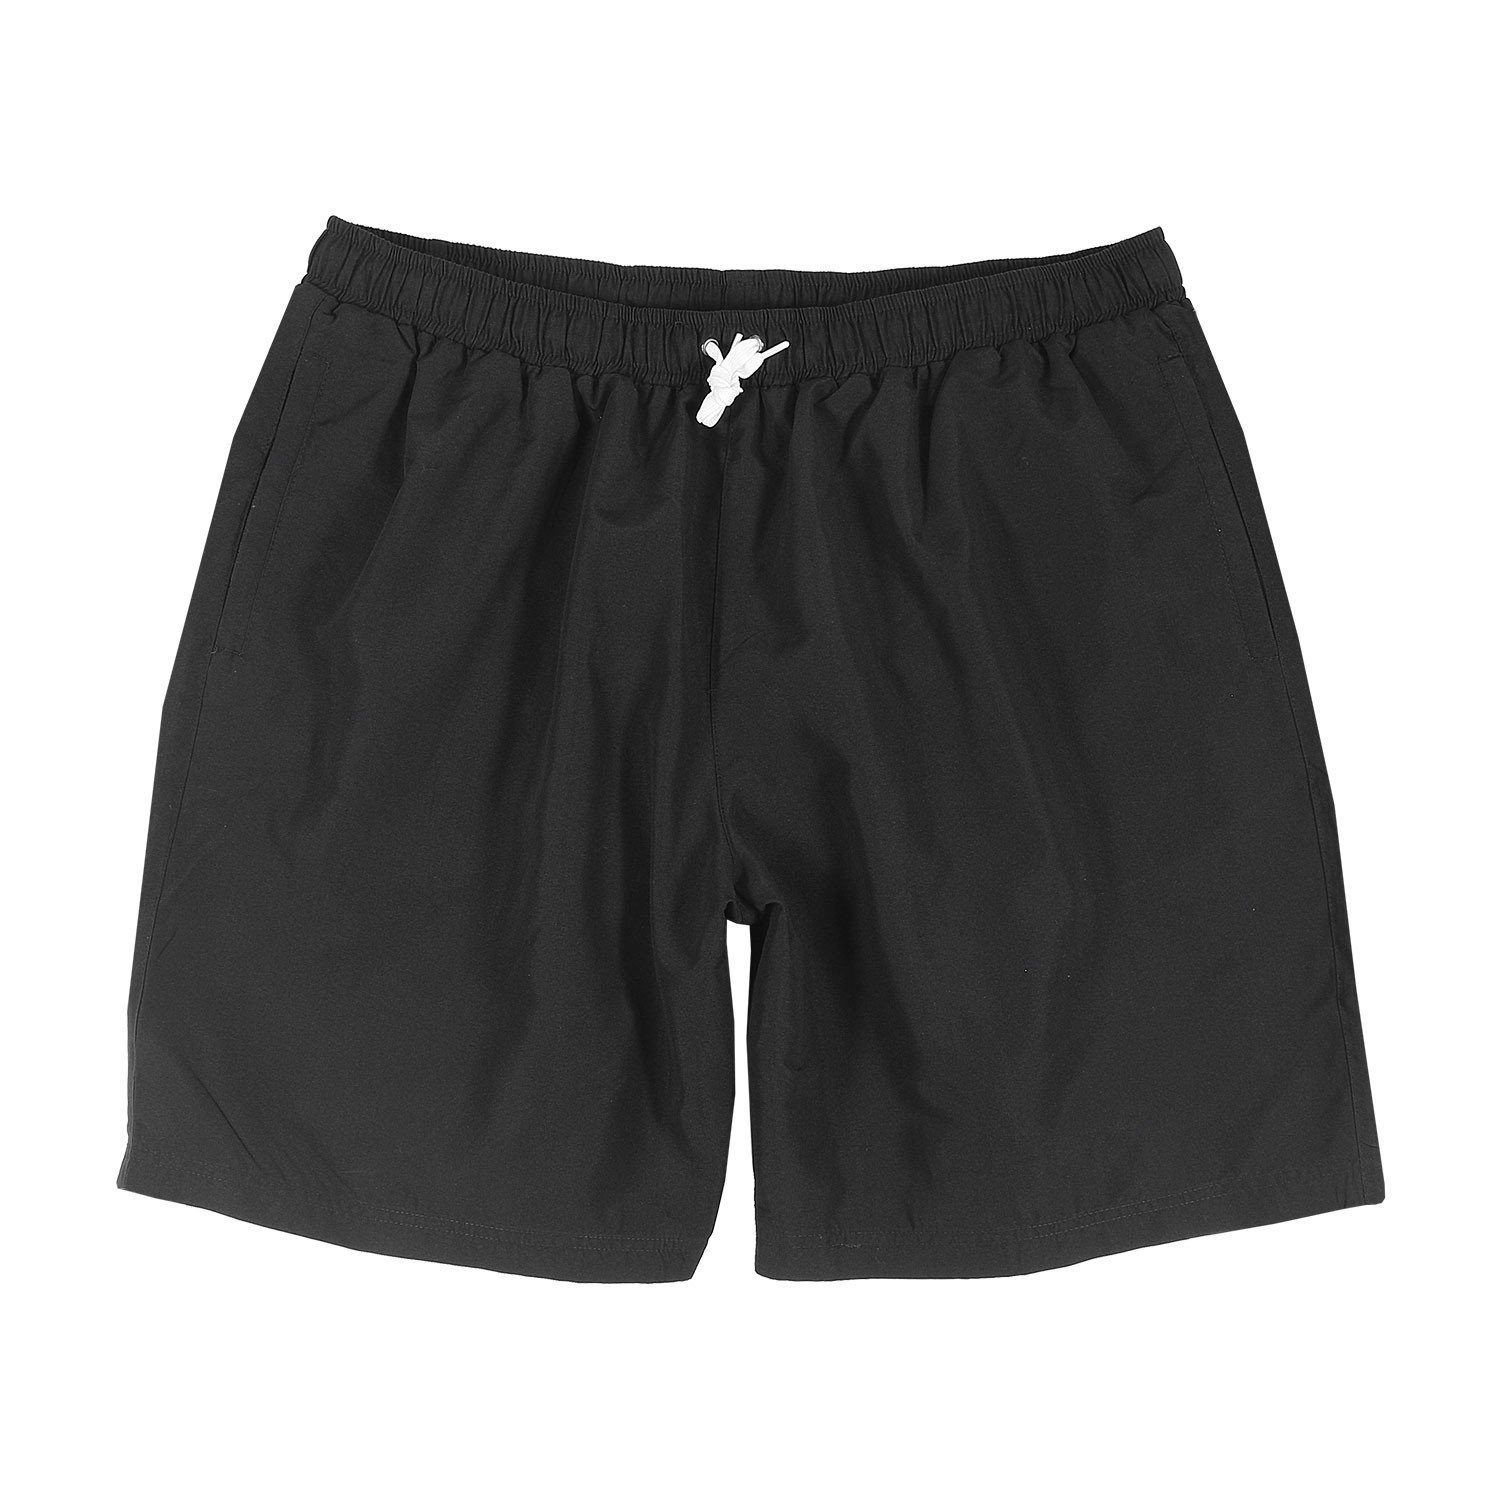 Black Swimming trunks by Abraxas in big sizes up to 10XL